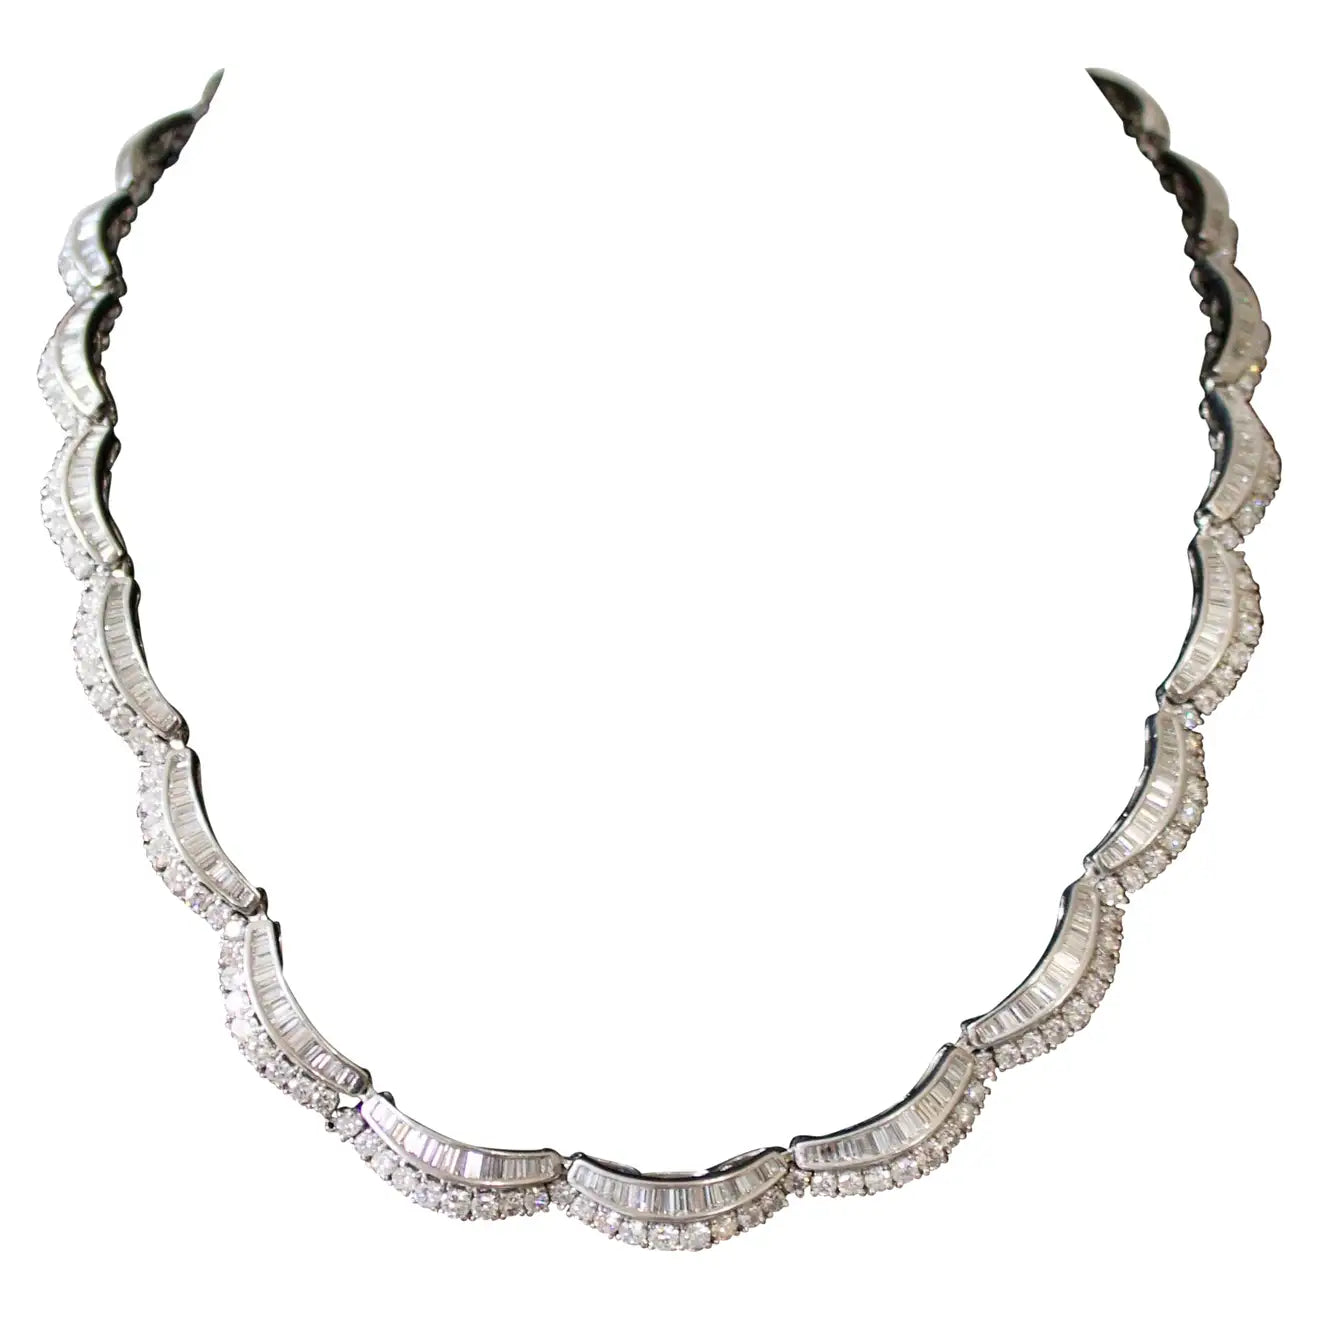 Important Diamond Necklace in 18k Gold 16.13 Carats